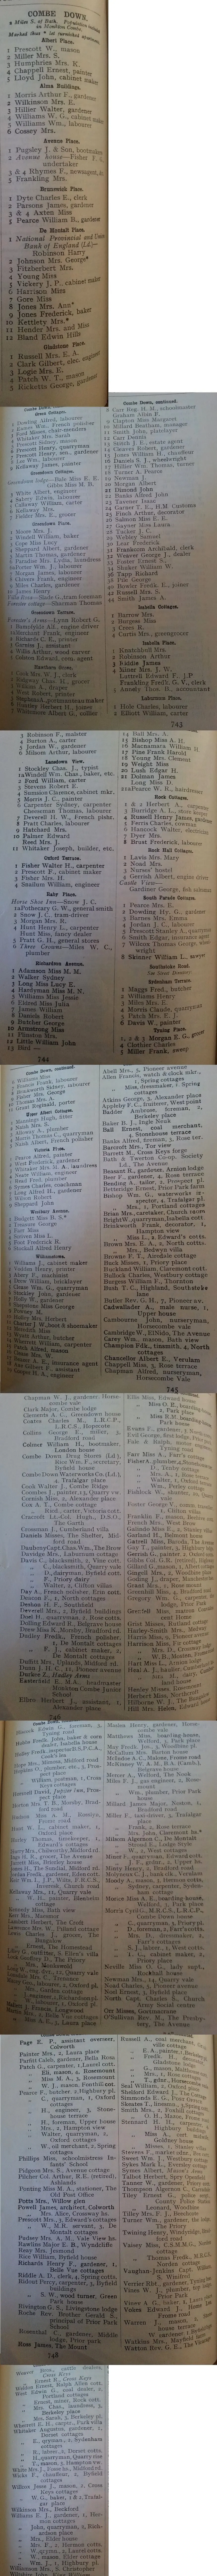 1923 post office directory for combe down